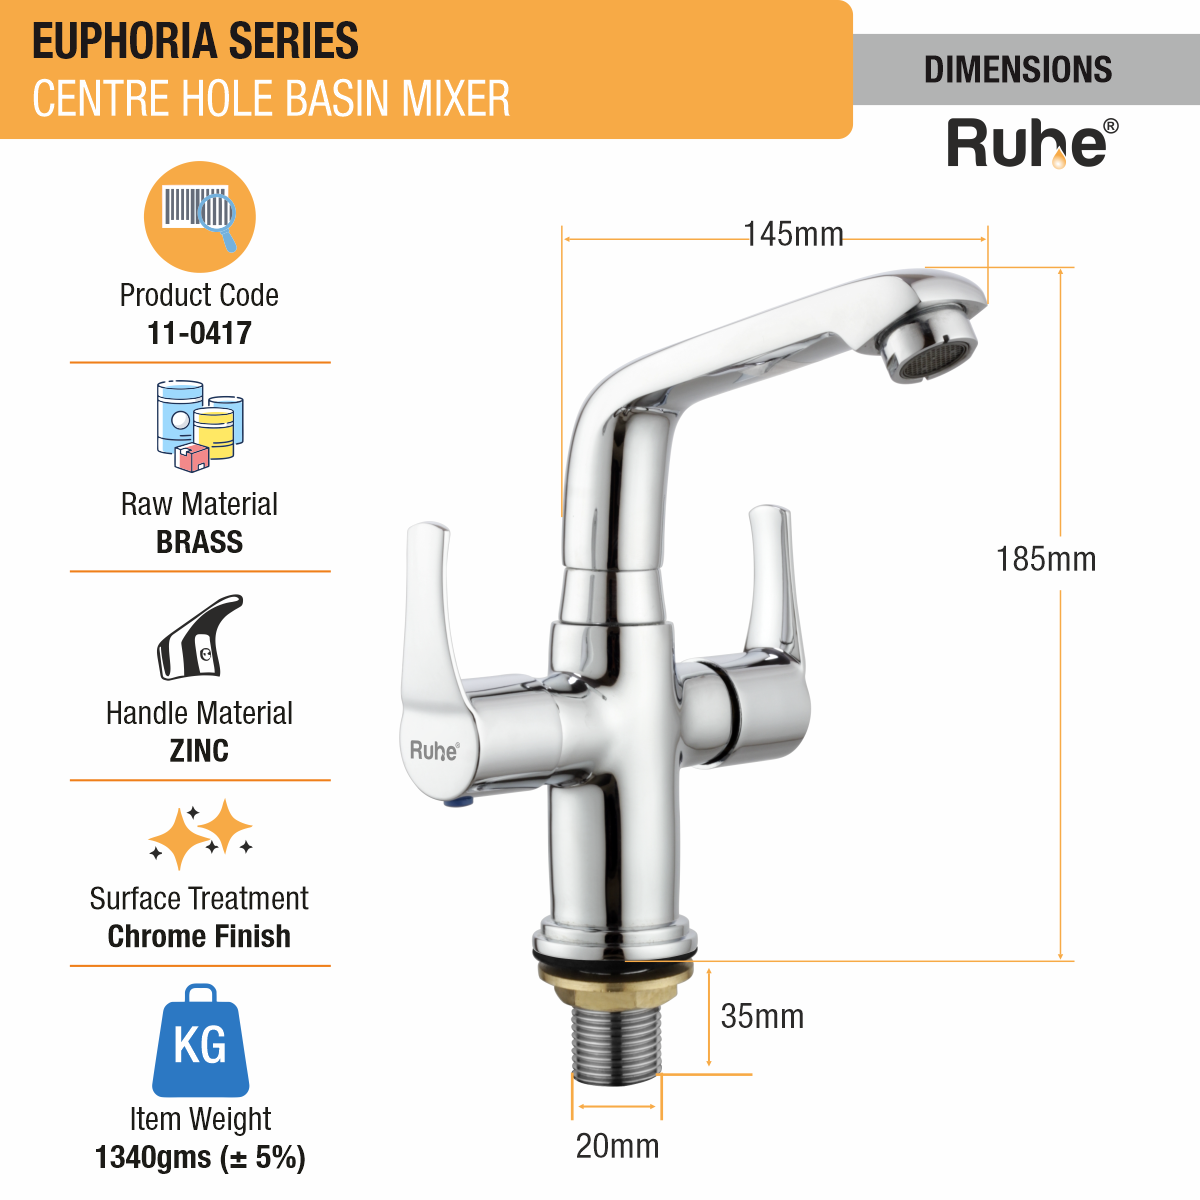 Euphoria Centre Hole Basin Mixer with Small (7 inches) Swivel Spout Faucet dimensions and size